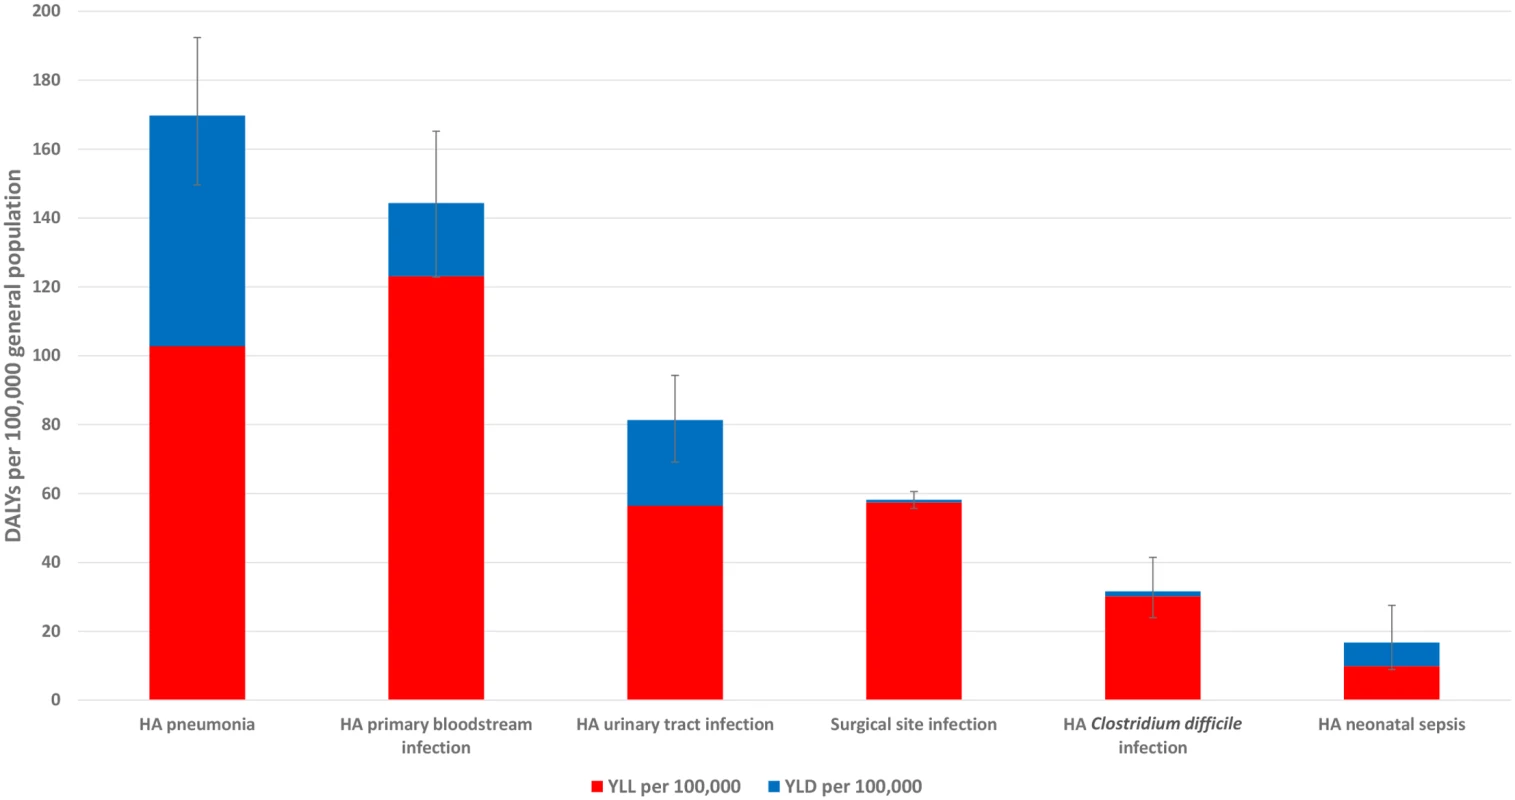 Estimated annual burden of six healthcare-associated infections in DALYs per 100,000 population (median and 95% uncertainty interval), split between YLLs and YLDs, EU/EEA, 2011–2012 (time discounting was not applied).